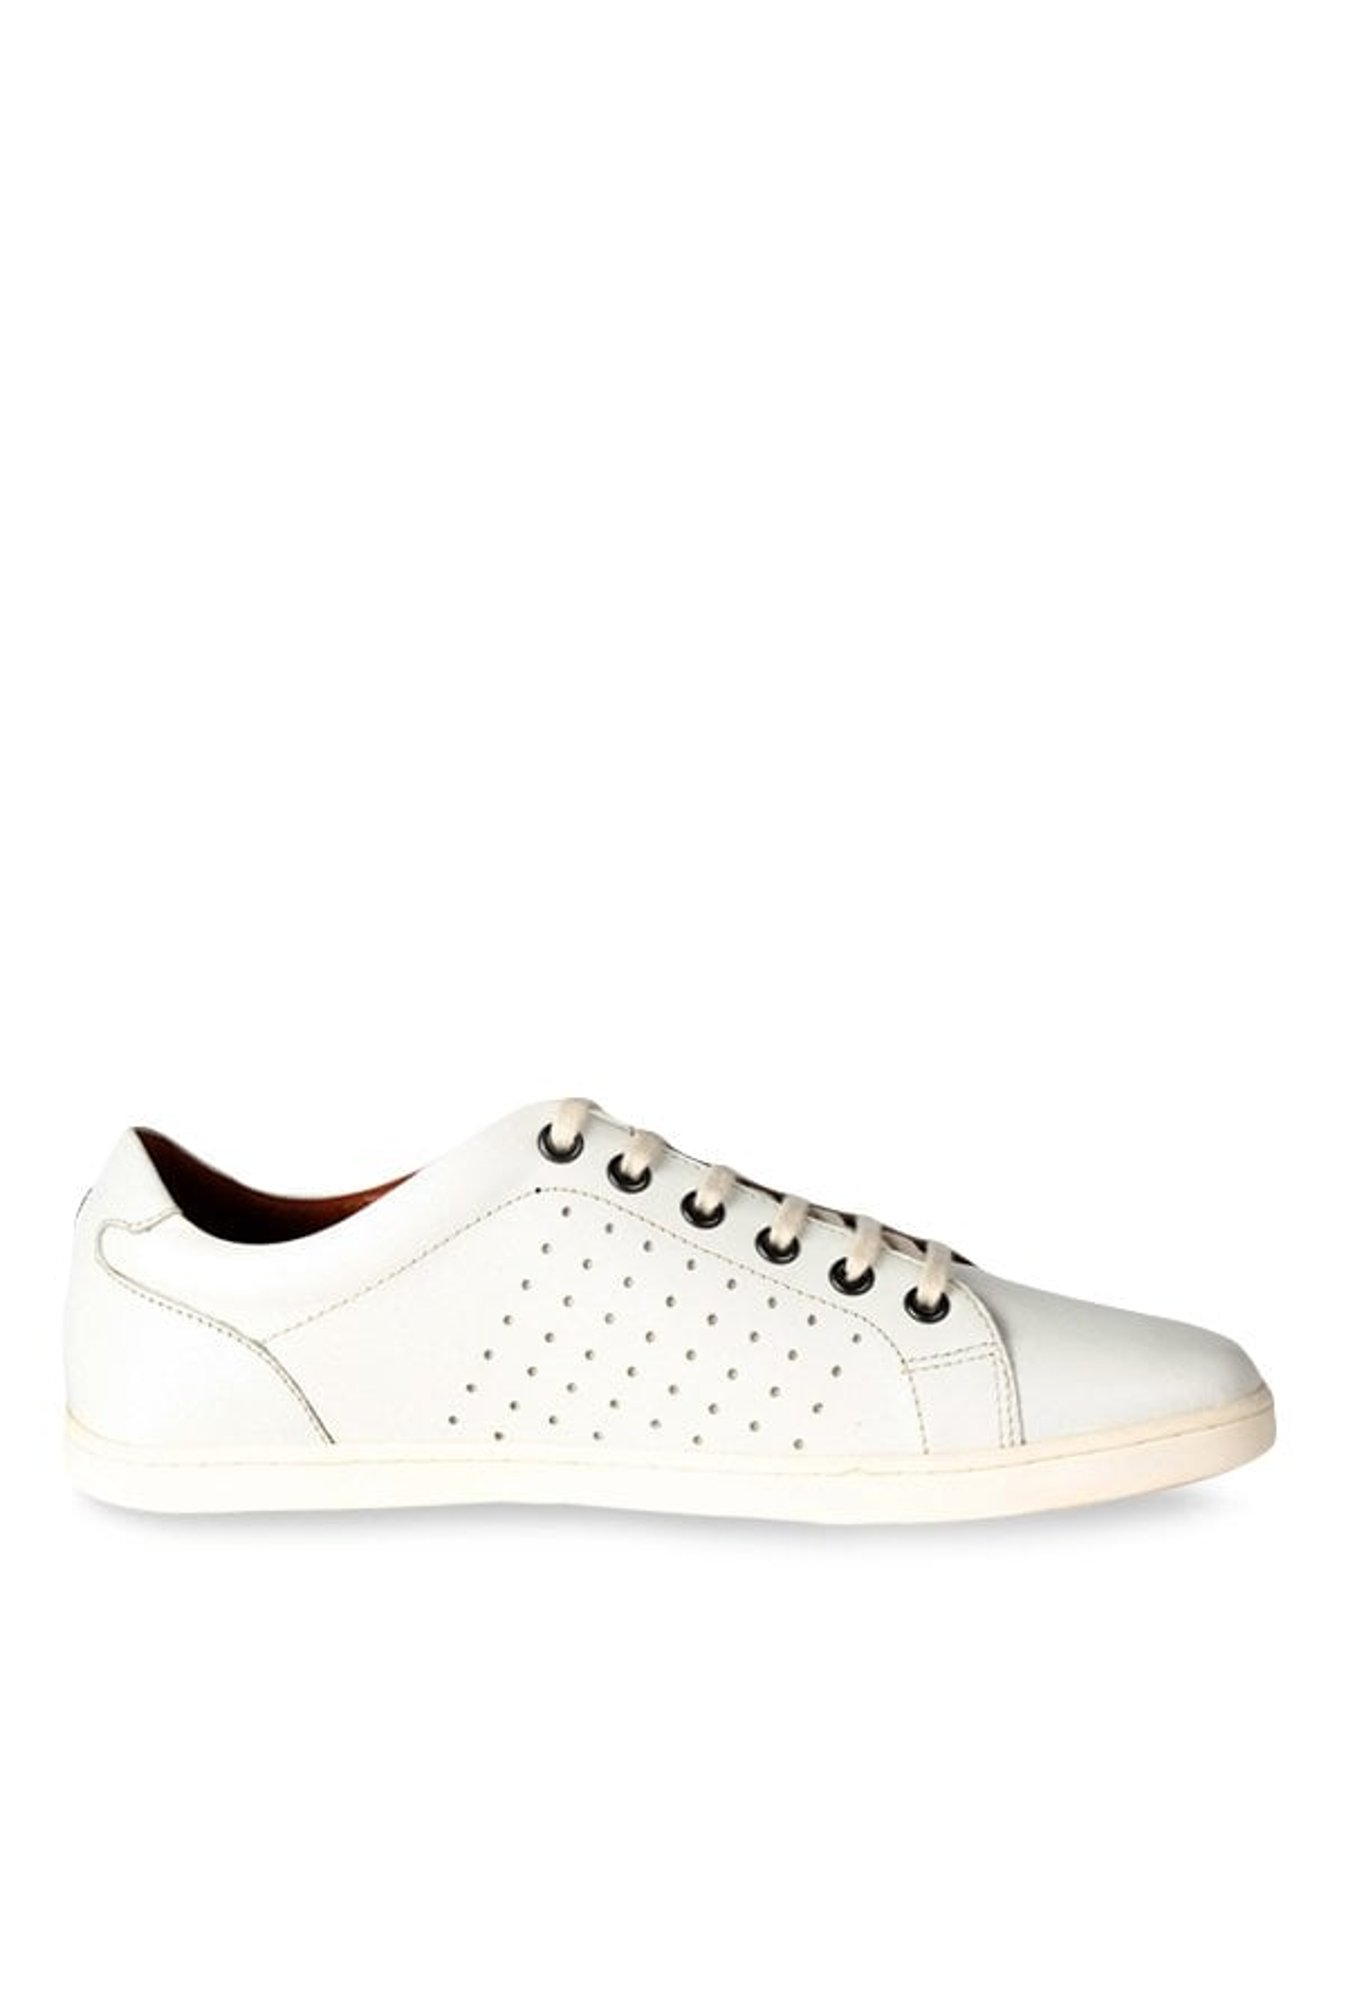 LP LOUIS PHILIPPE sneakers For Men - Buy White Color LP LOUIS PHILIPPE  sneakers For Men Online at Best Price - Shop Online for Footwears in India